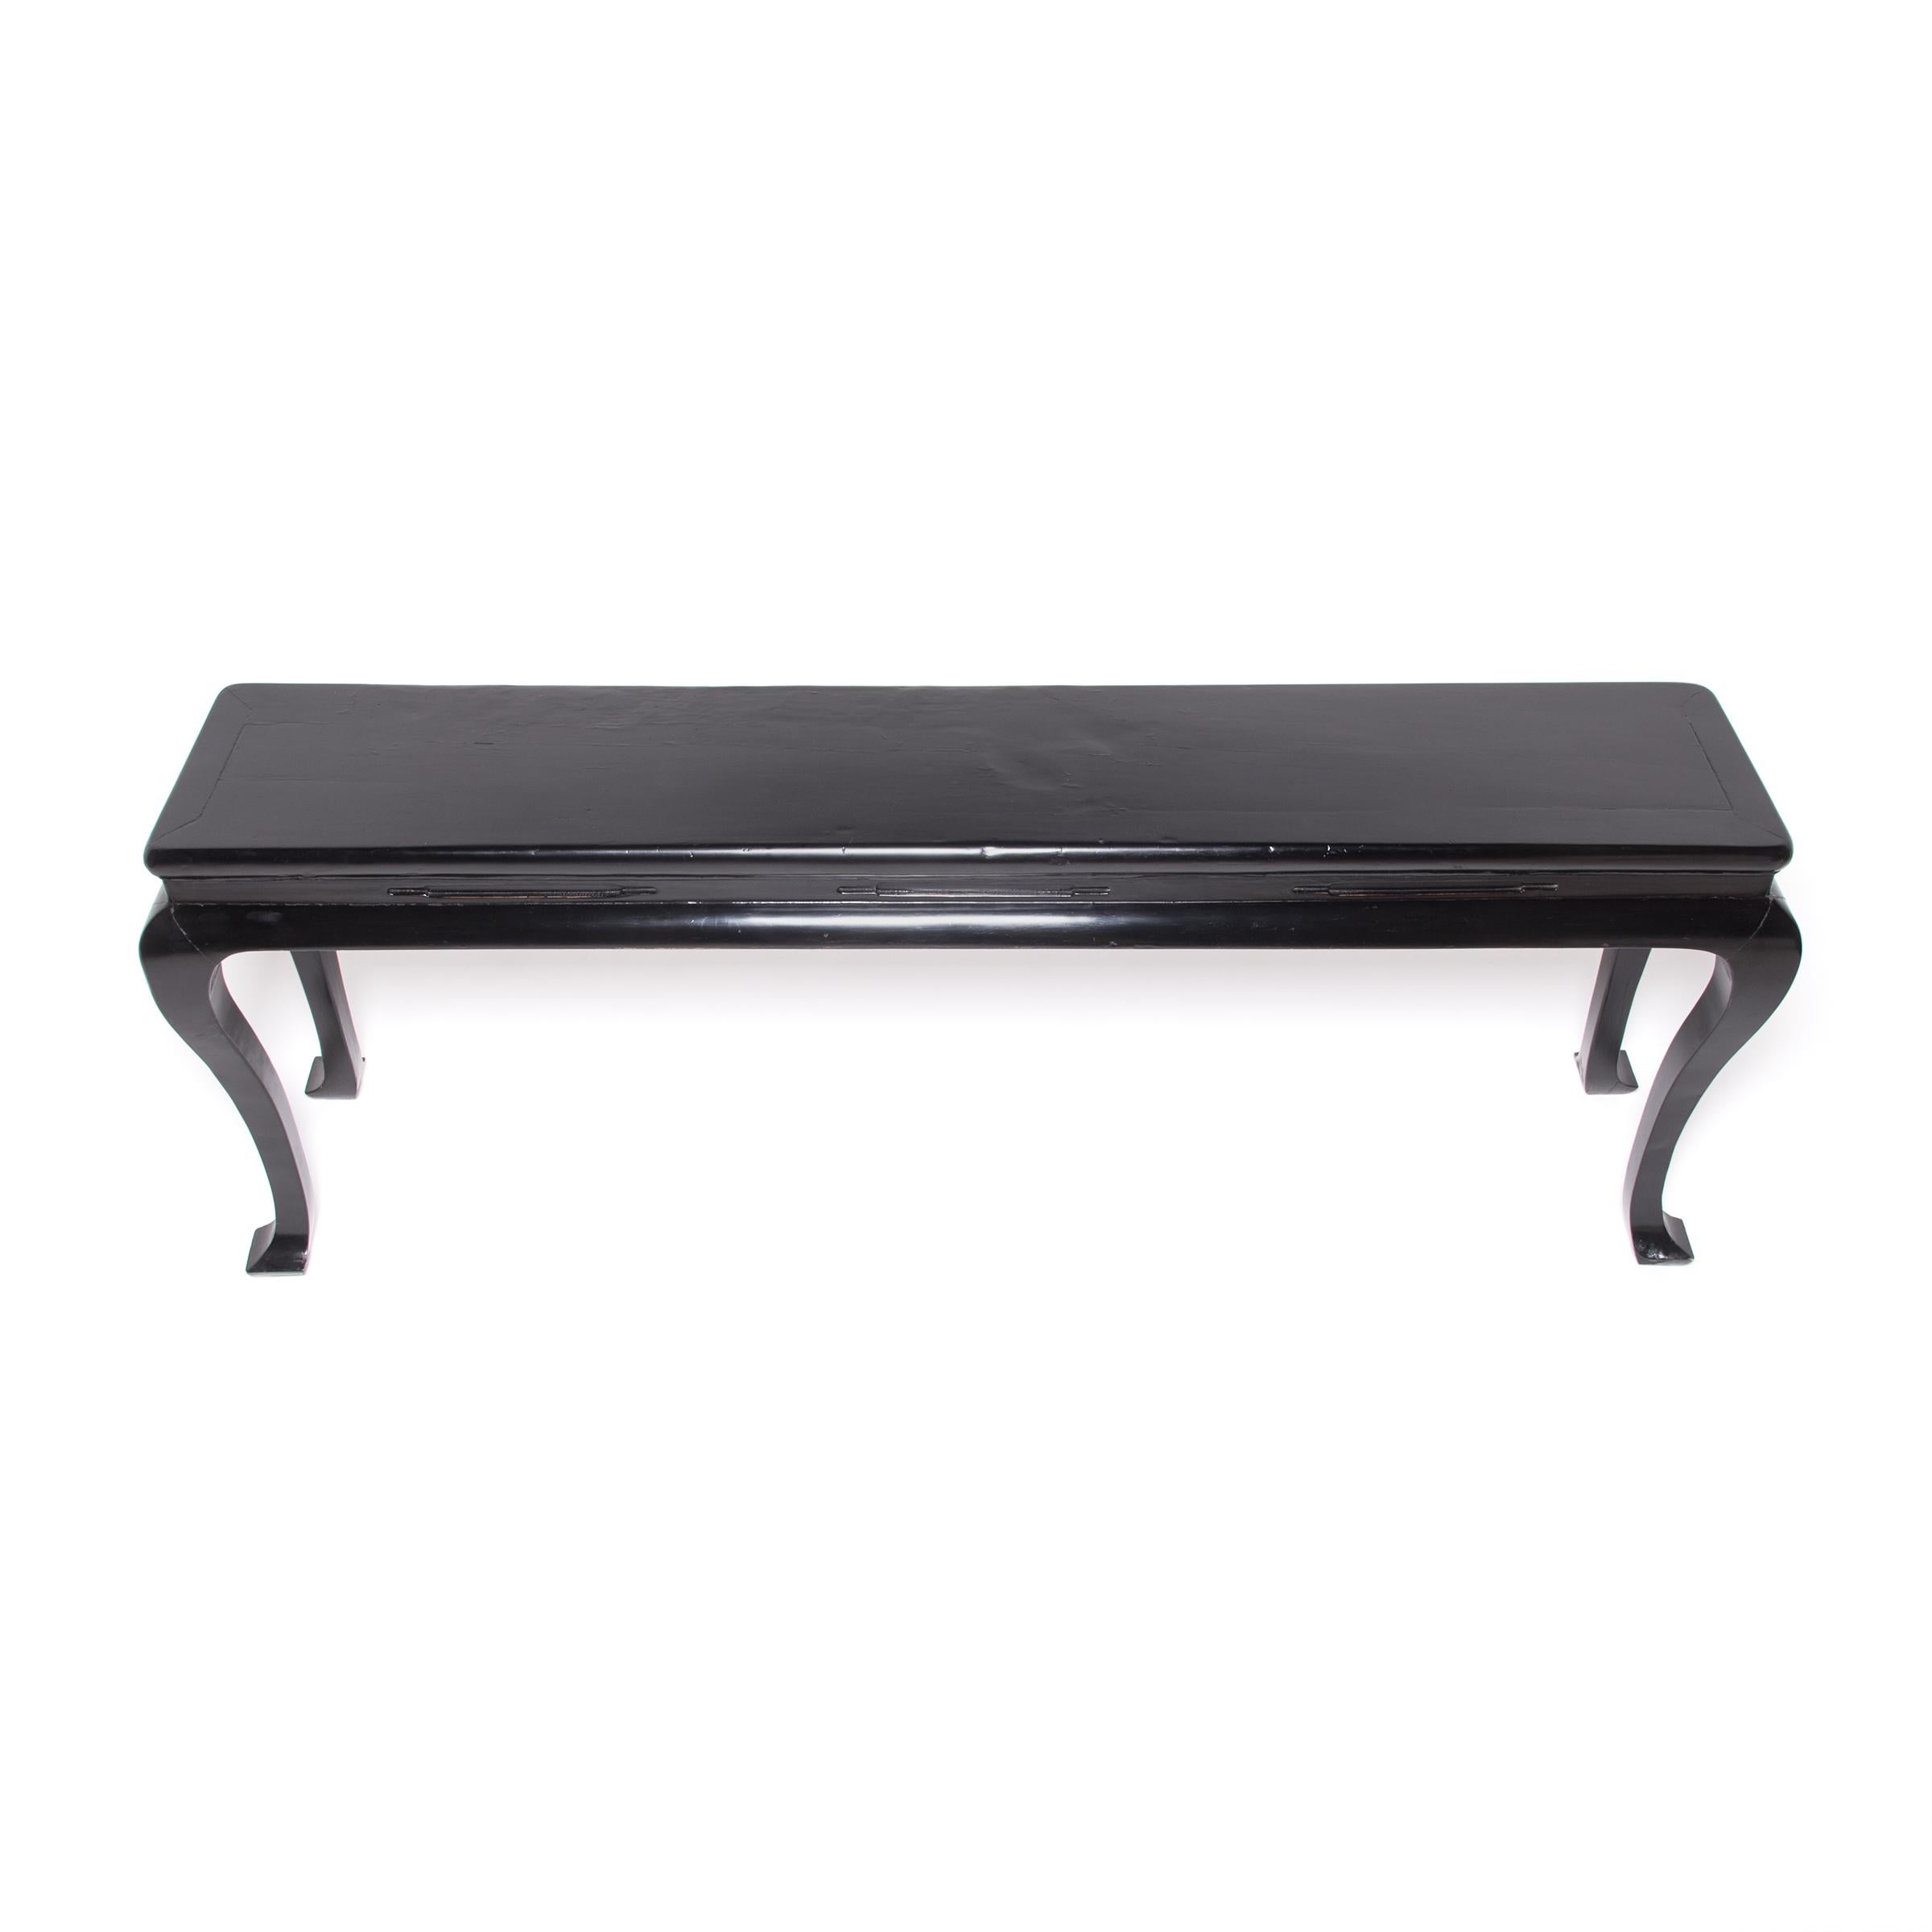 Lacquered Black Lacquer Splayed Foot Scholars' Table, c. 1900 For Sale